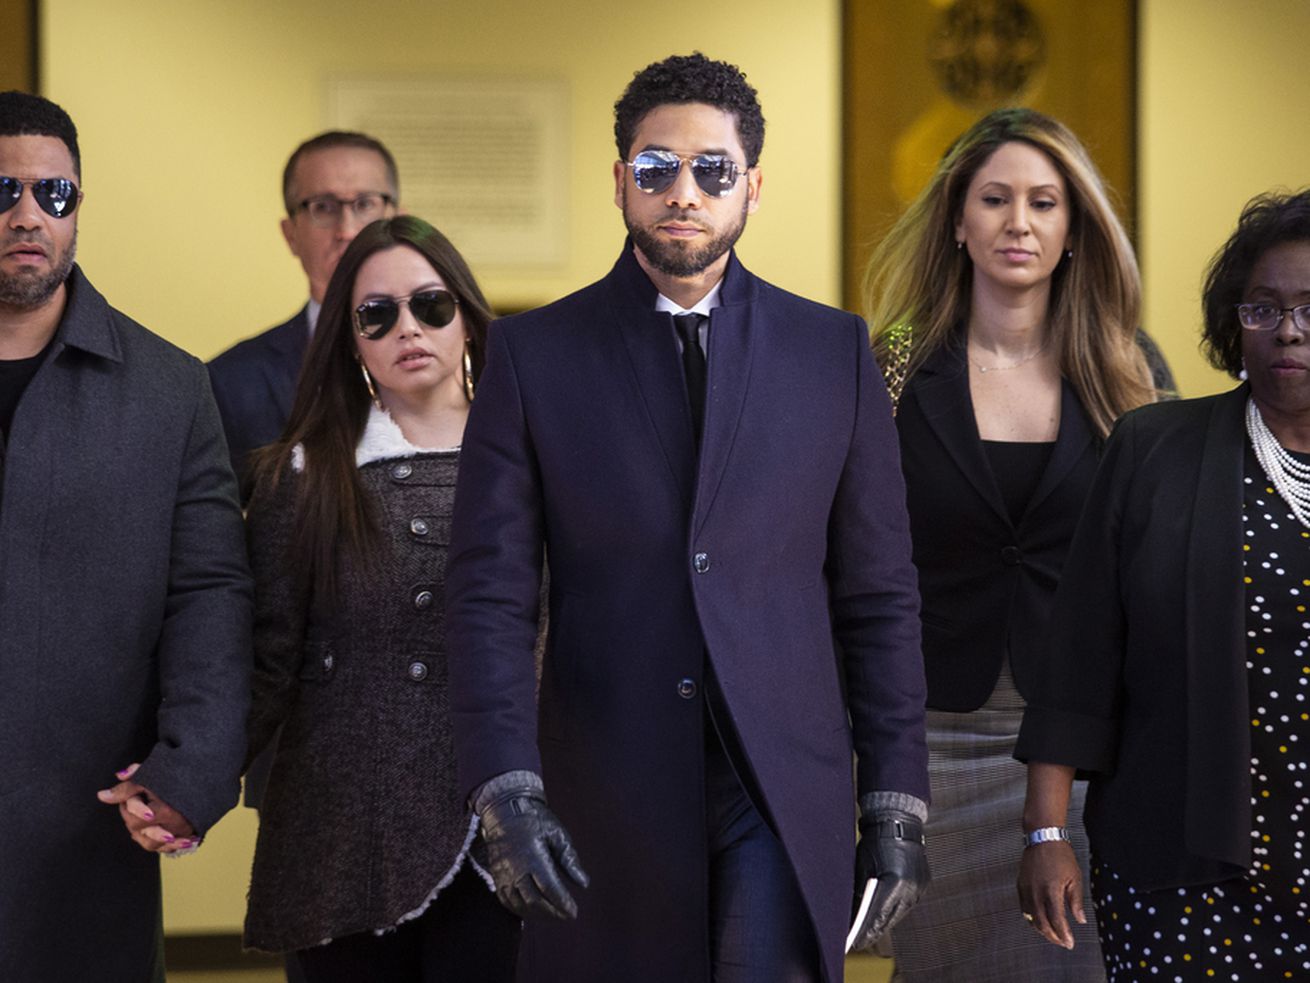 Jussie Smollett leaves court after charges were dropped. | Ashlee Rezin/Sun-Times